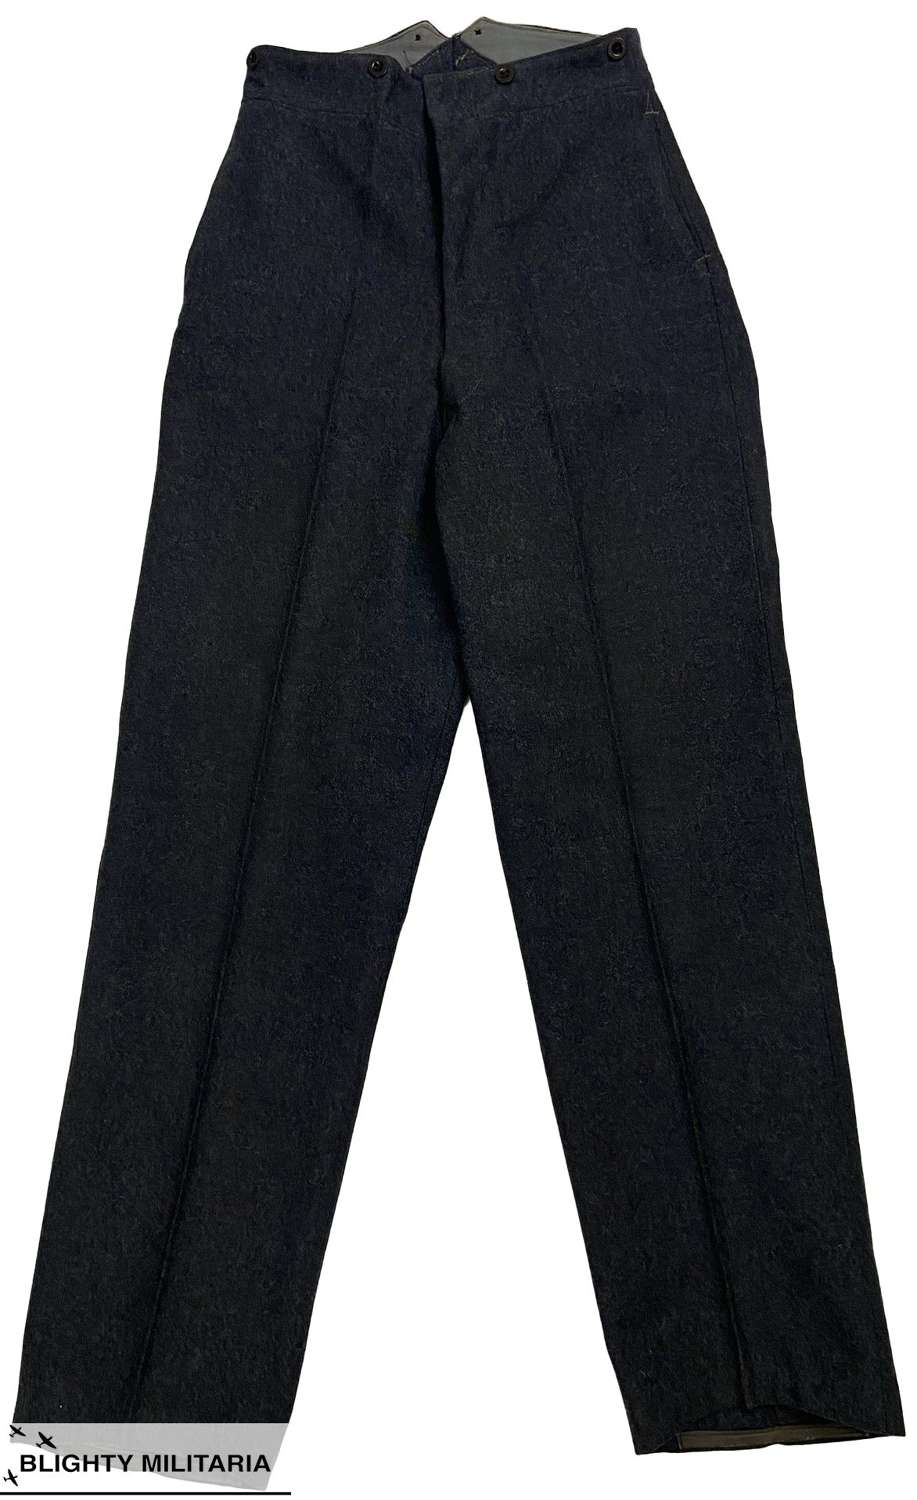 Original 1950 Dated RAF Ordinary Airman's Trousers - Tall Size